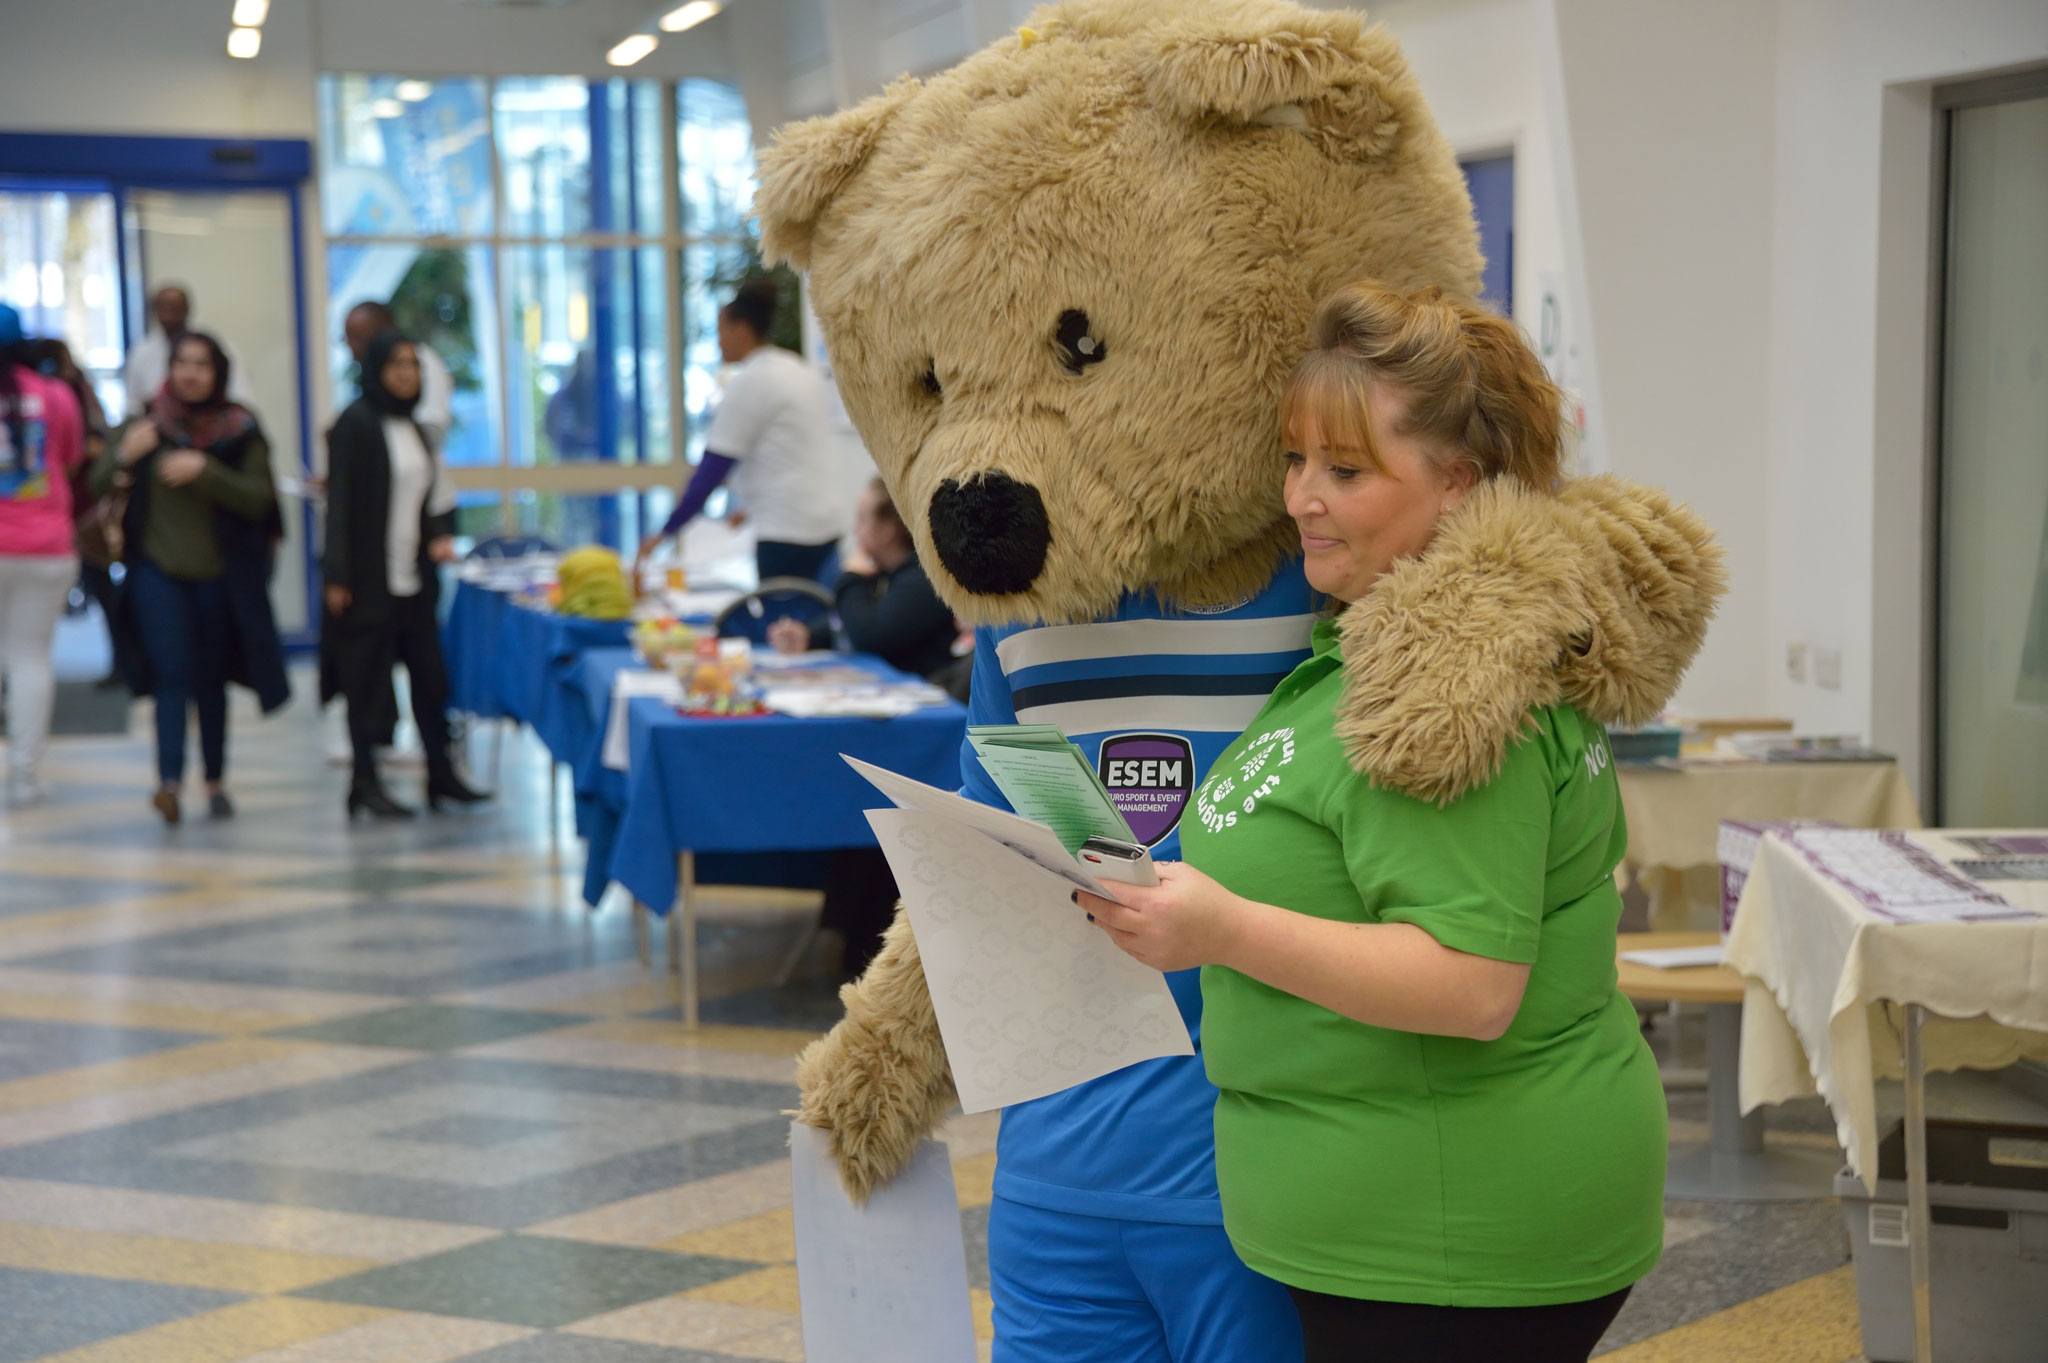 Student and mascot at a health promotion event at the University of Bolton